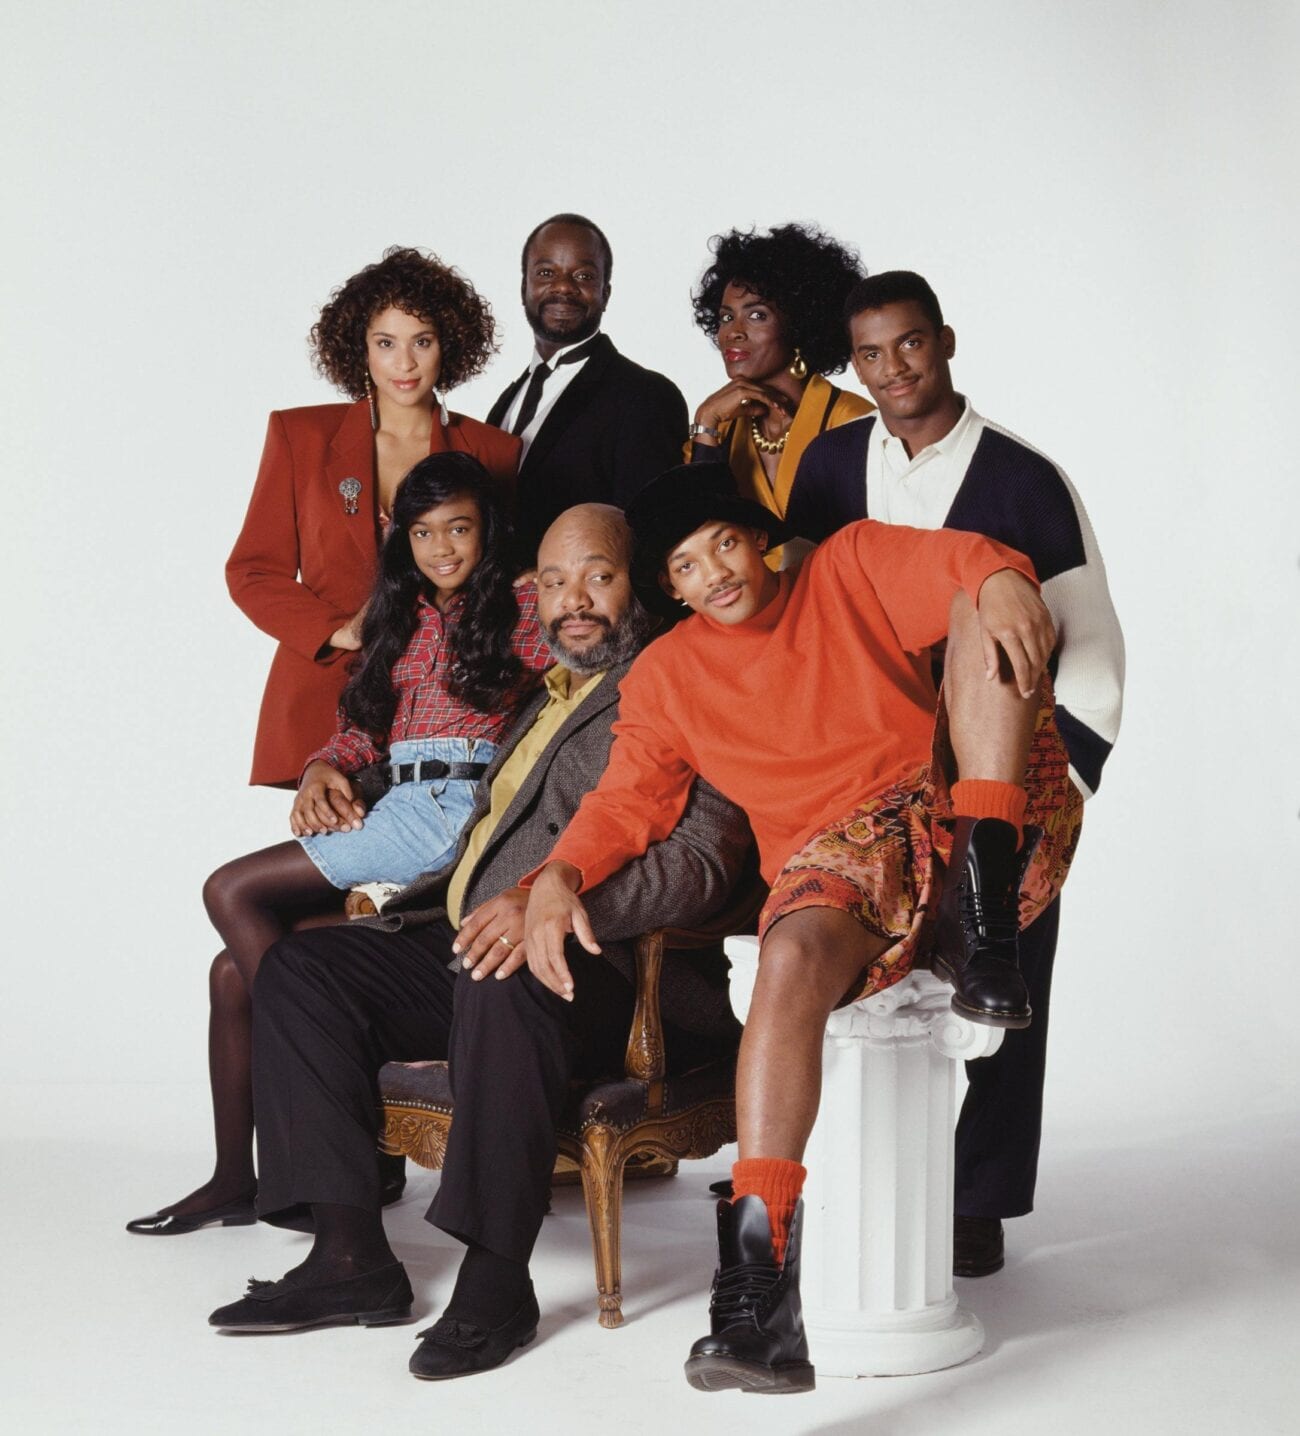 full fresh prince of bel air episodes online free